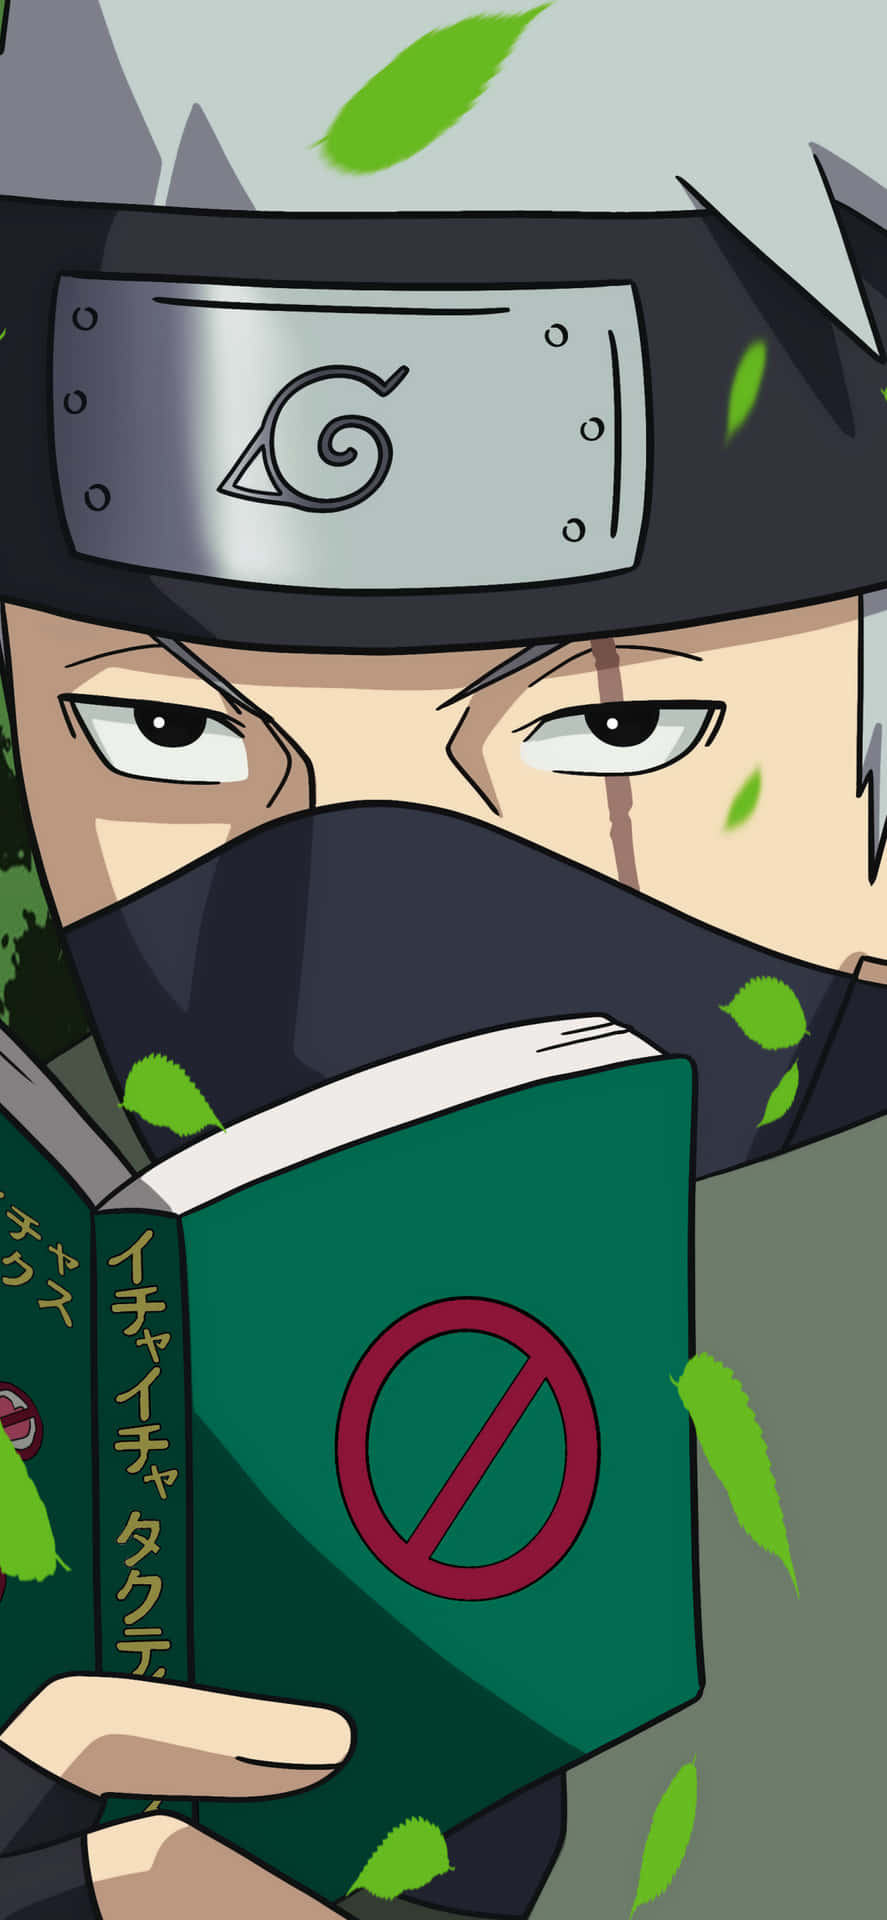 Naruto iPhone HD Wallpaper, Free Naruto iPhone Wallpaper Image For All Devices